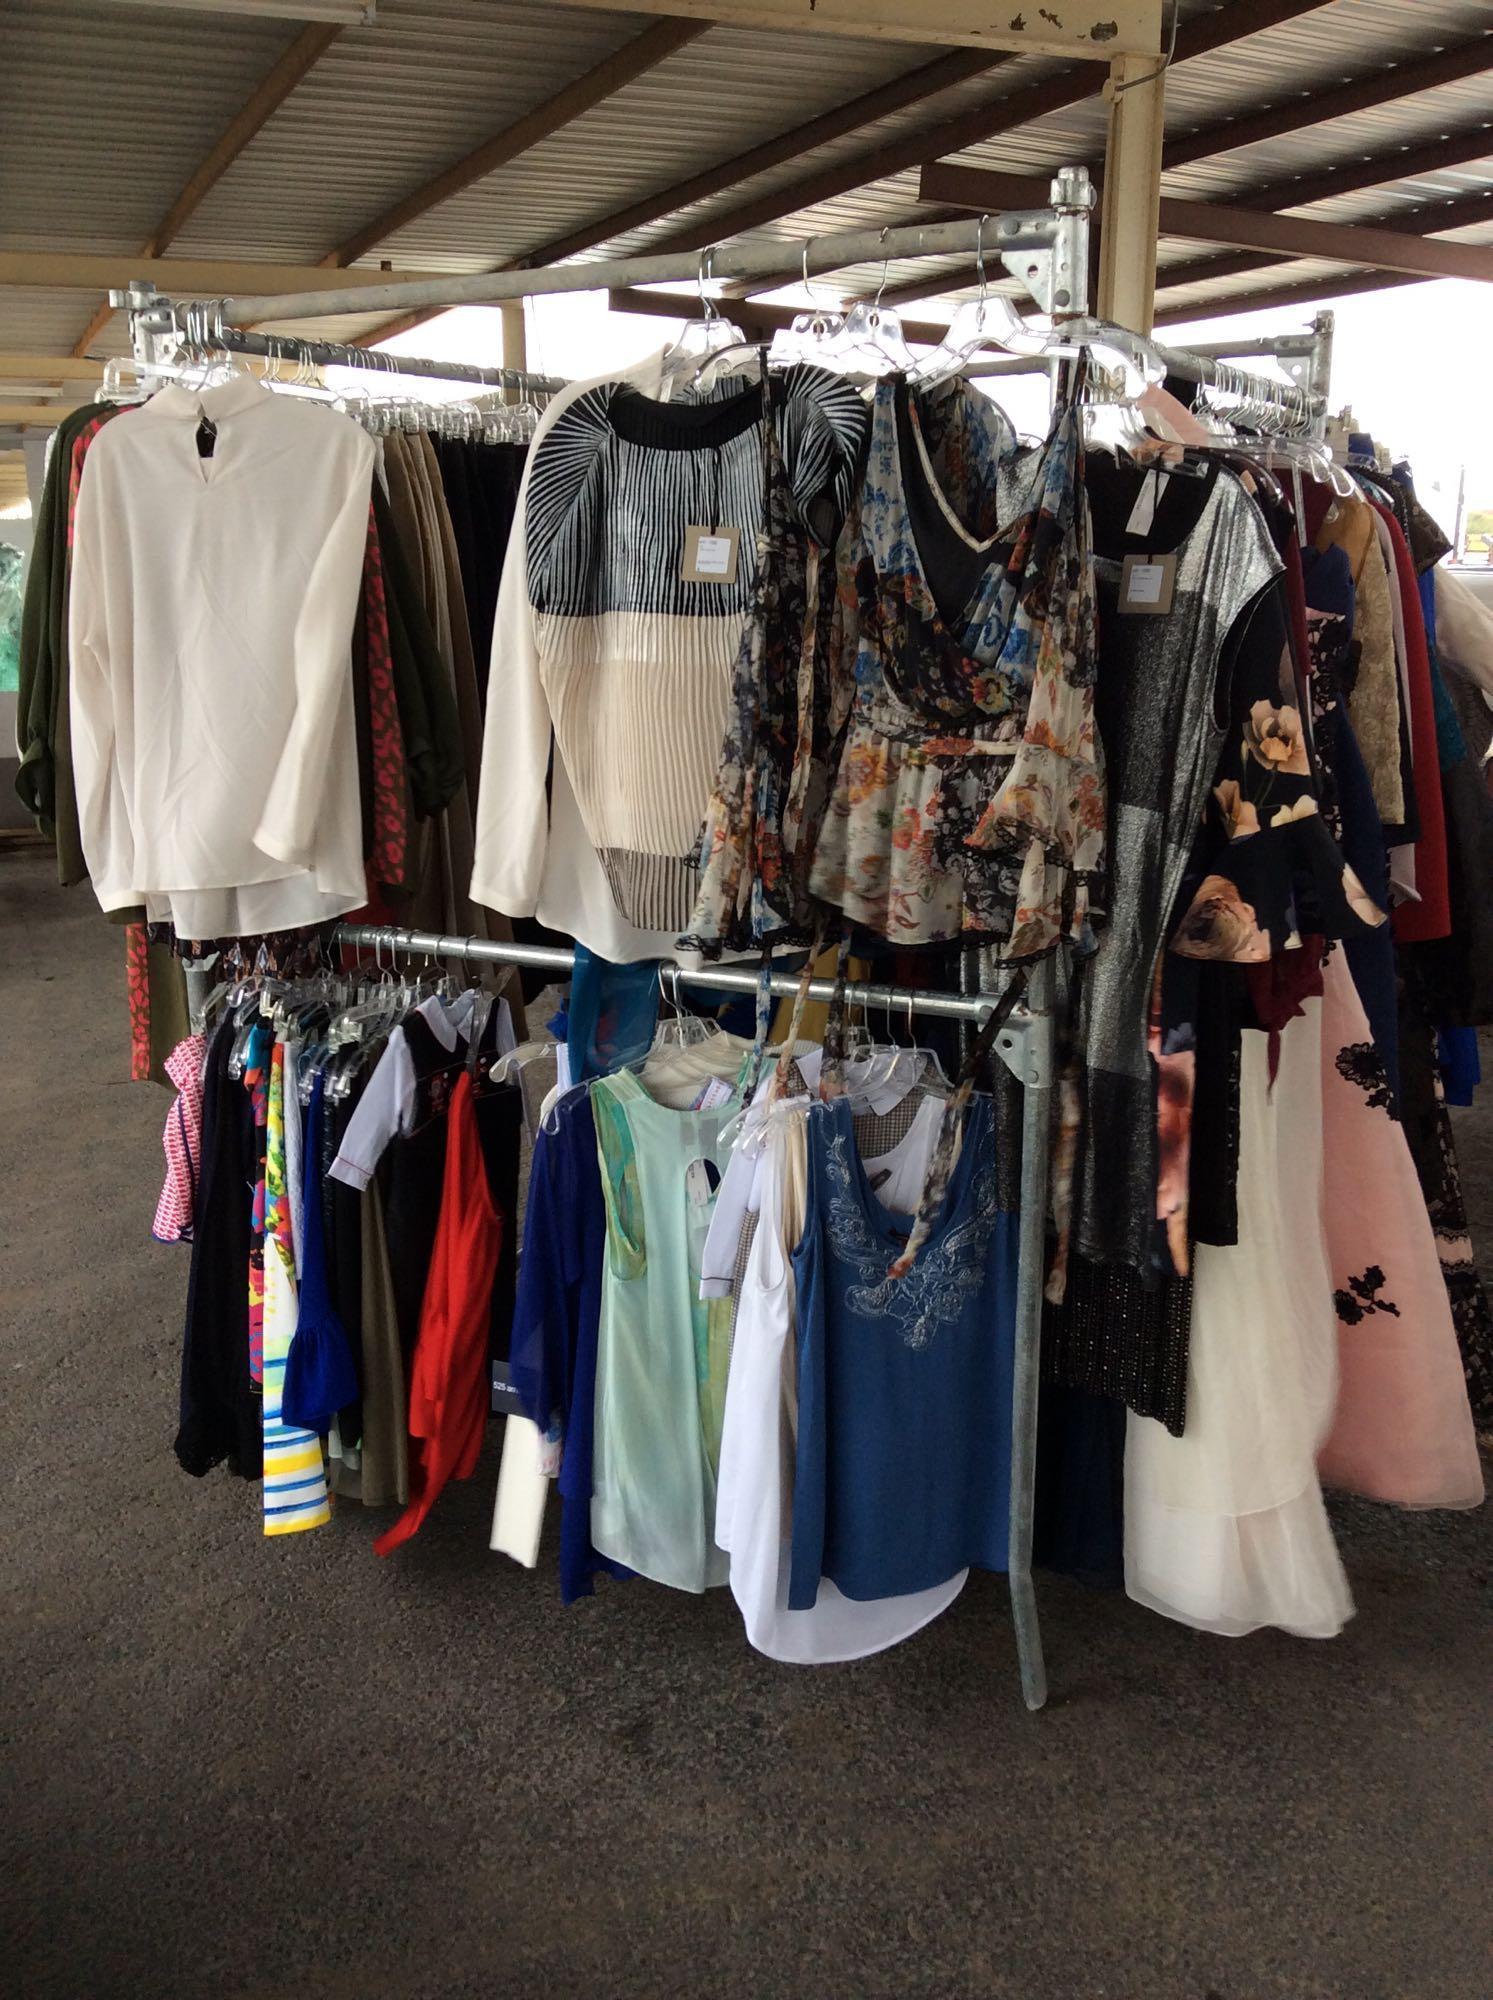 Group of dresses, pants, blouses and kids clothing